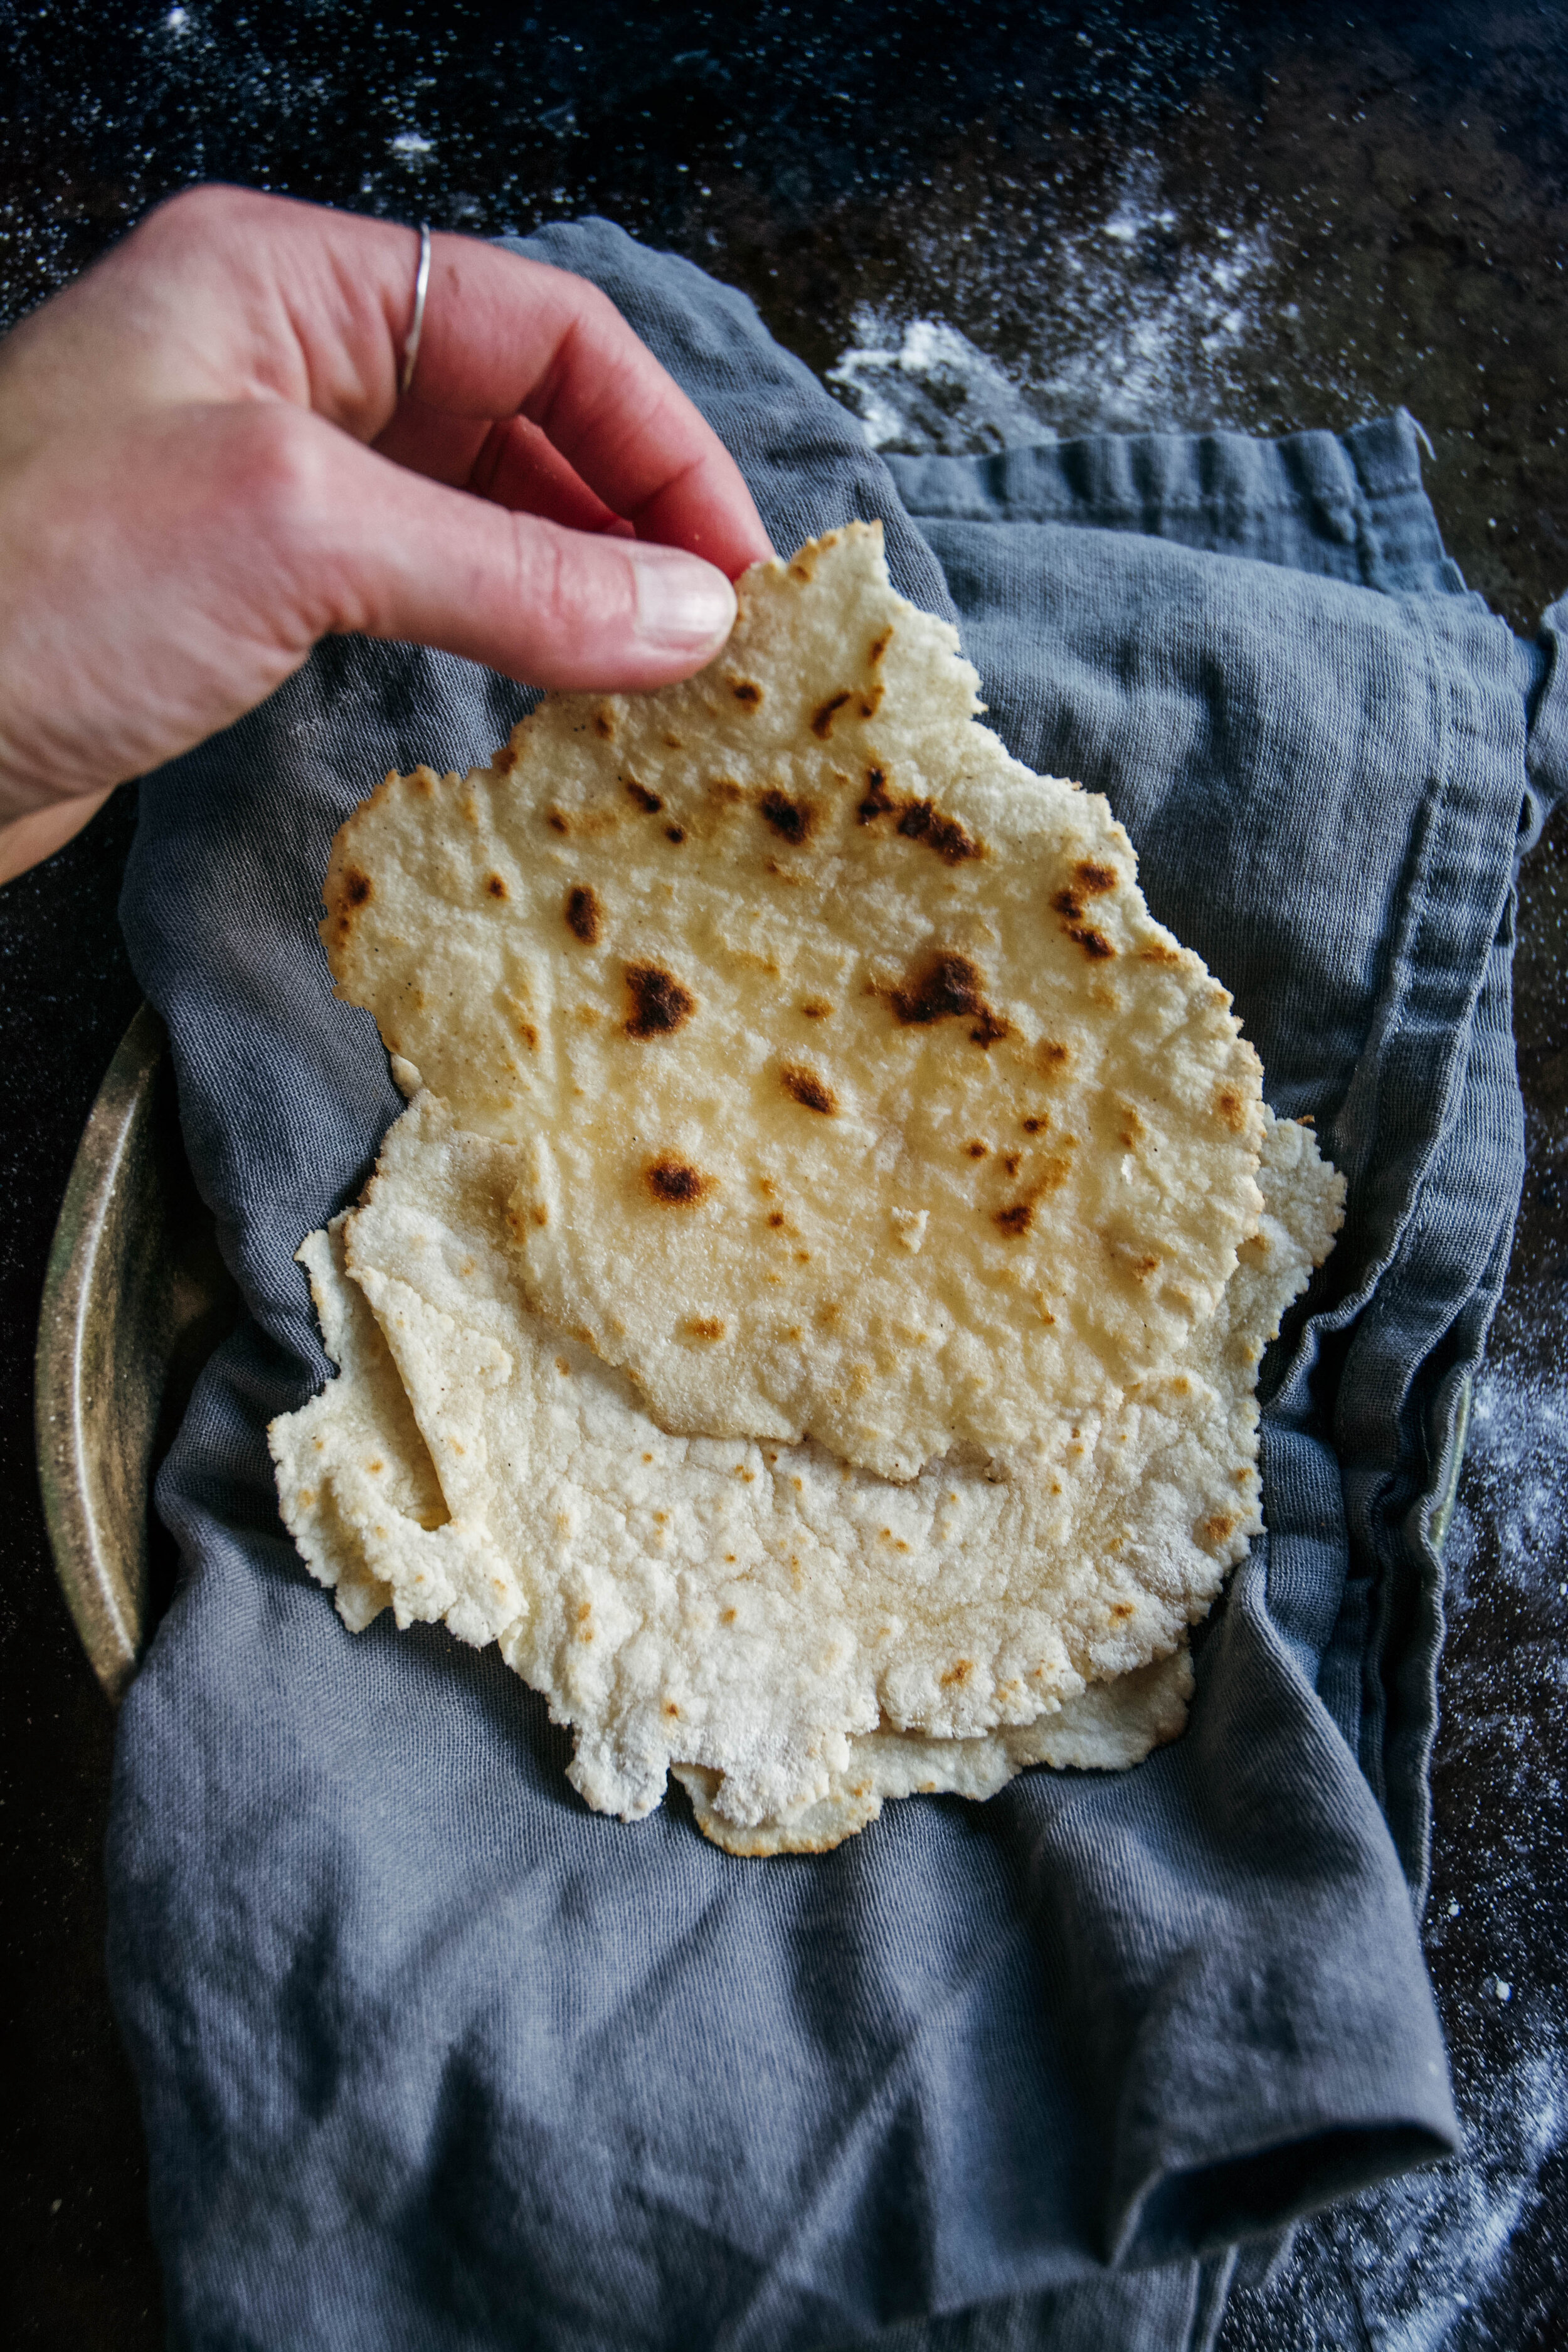  Making paleo tortillas is incredibly easy and fun! All you need is cassava flour, coconut flour, water, apple cider vinegar, olive oil and salt. And no tortilla maker needed! A little wax paper will do the trick. So check out this 6 ingredient paleo tortilla recipe. #cassava #cassavatortillas #paleotortillas #paleo #whole30tortillas #calmeats #vegantortillas #vegantacos #paleotacos #tortillas #tortillarecipe #whole30 #vegan 